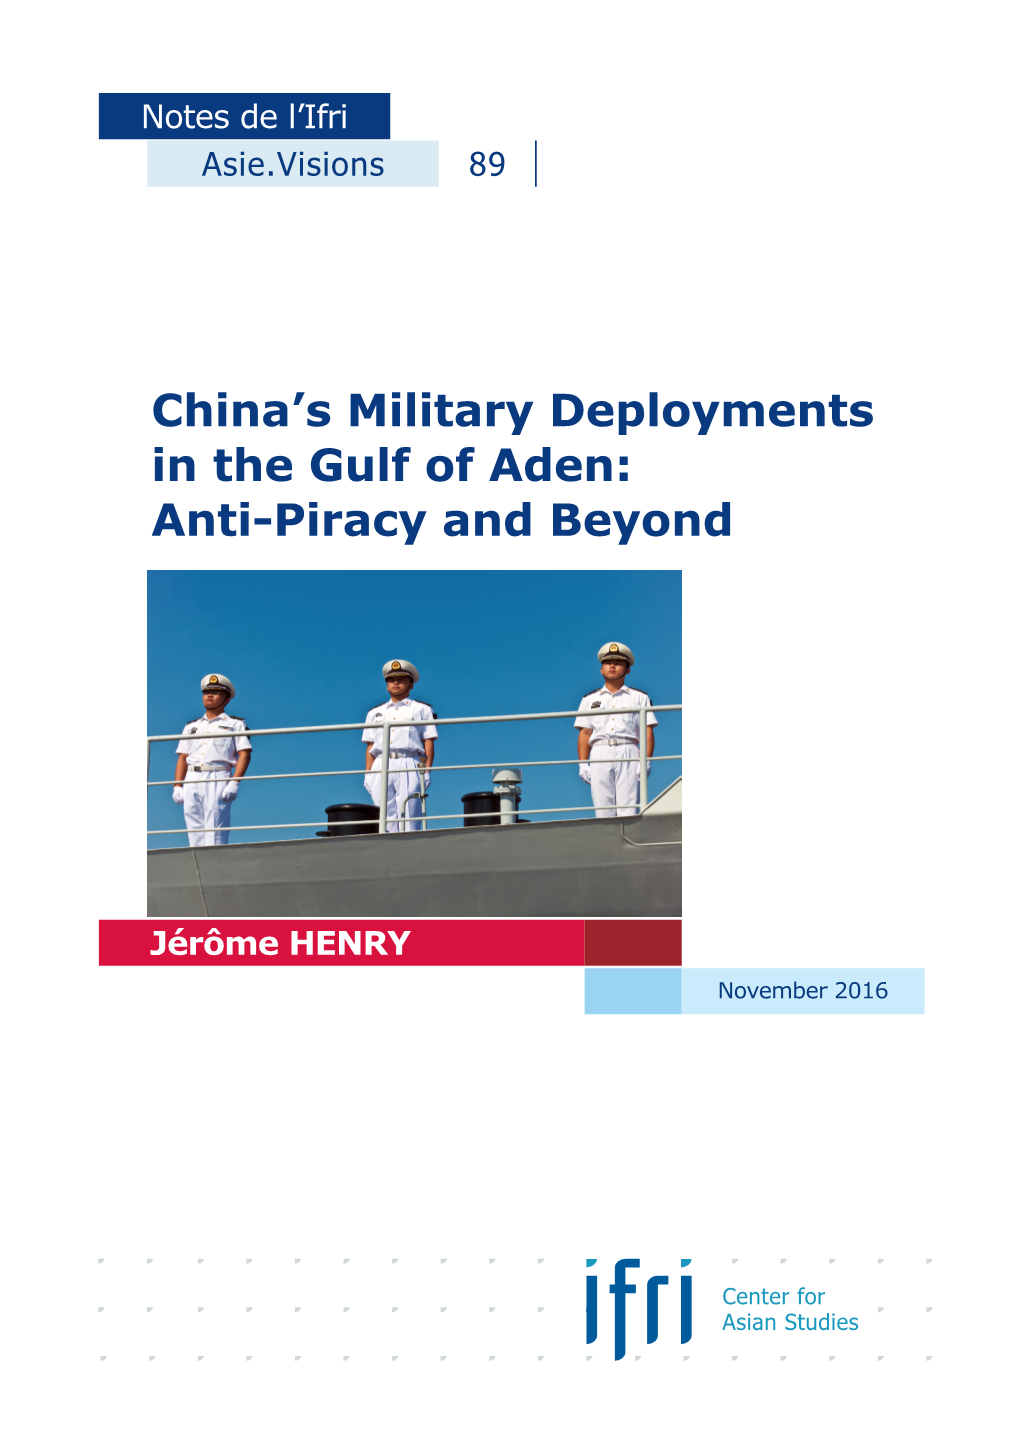 China's Military Deployments in the Gulf of Aden: Anti-Piracy and Beyond